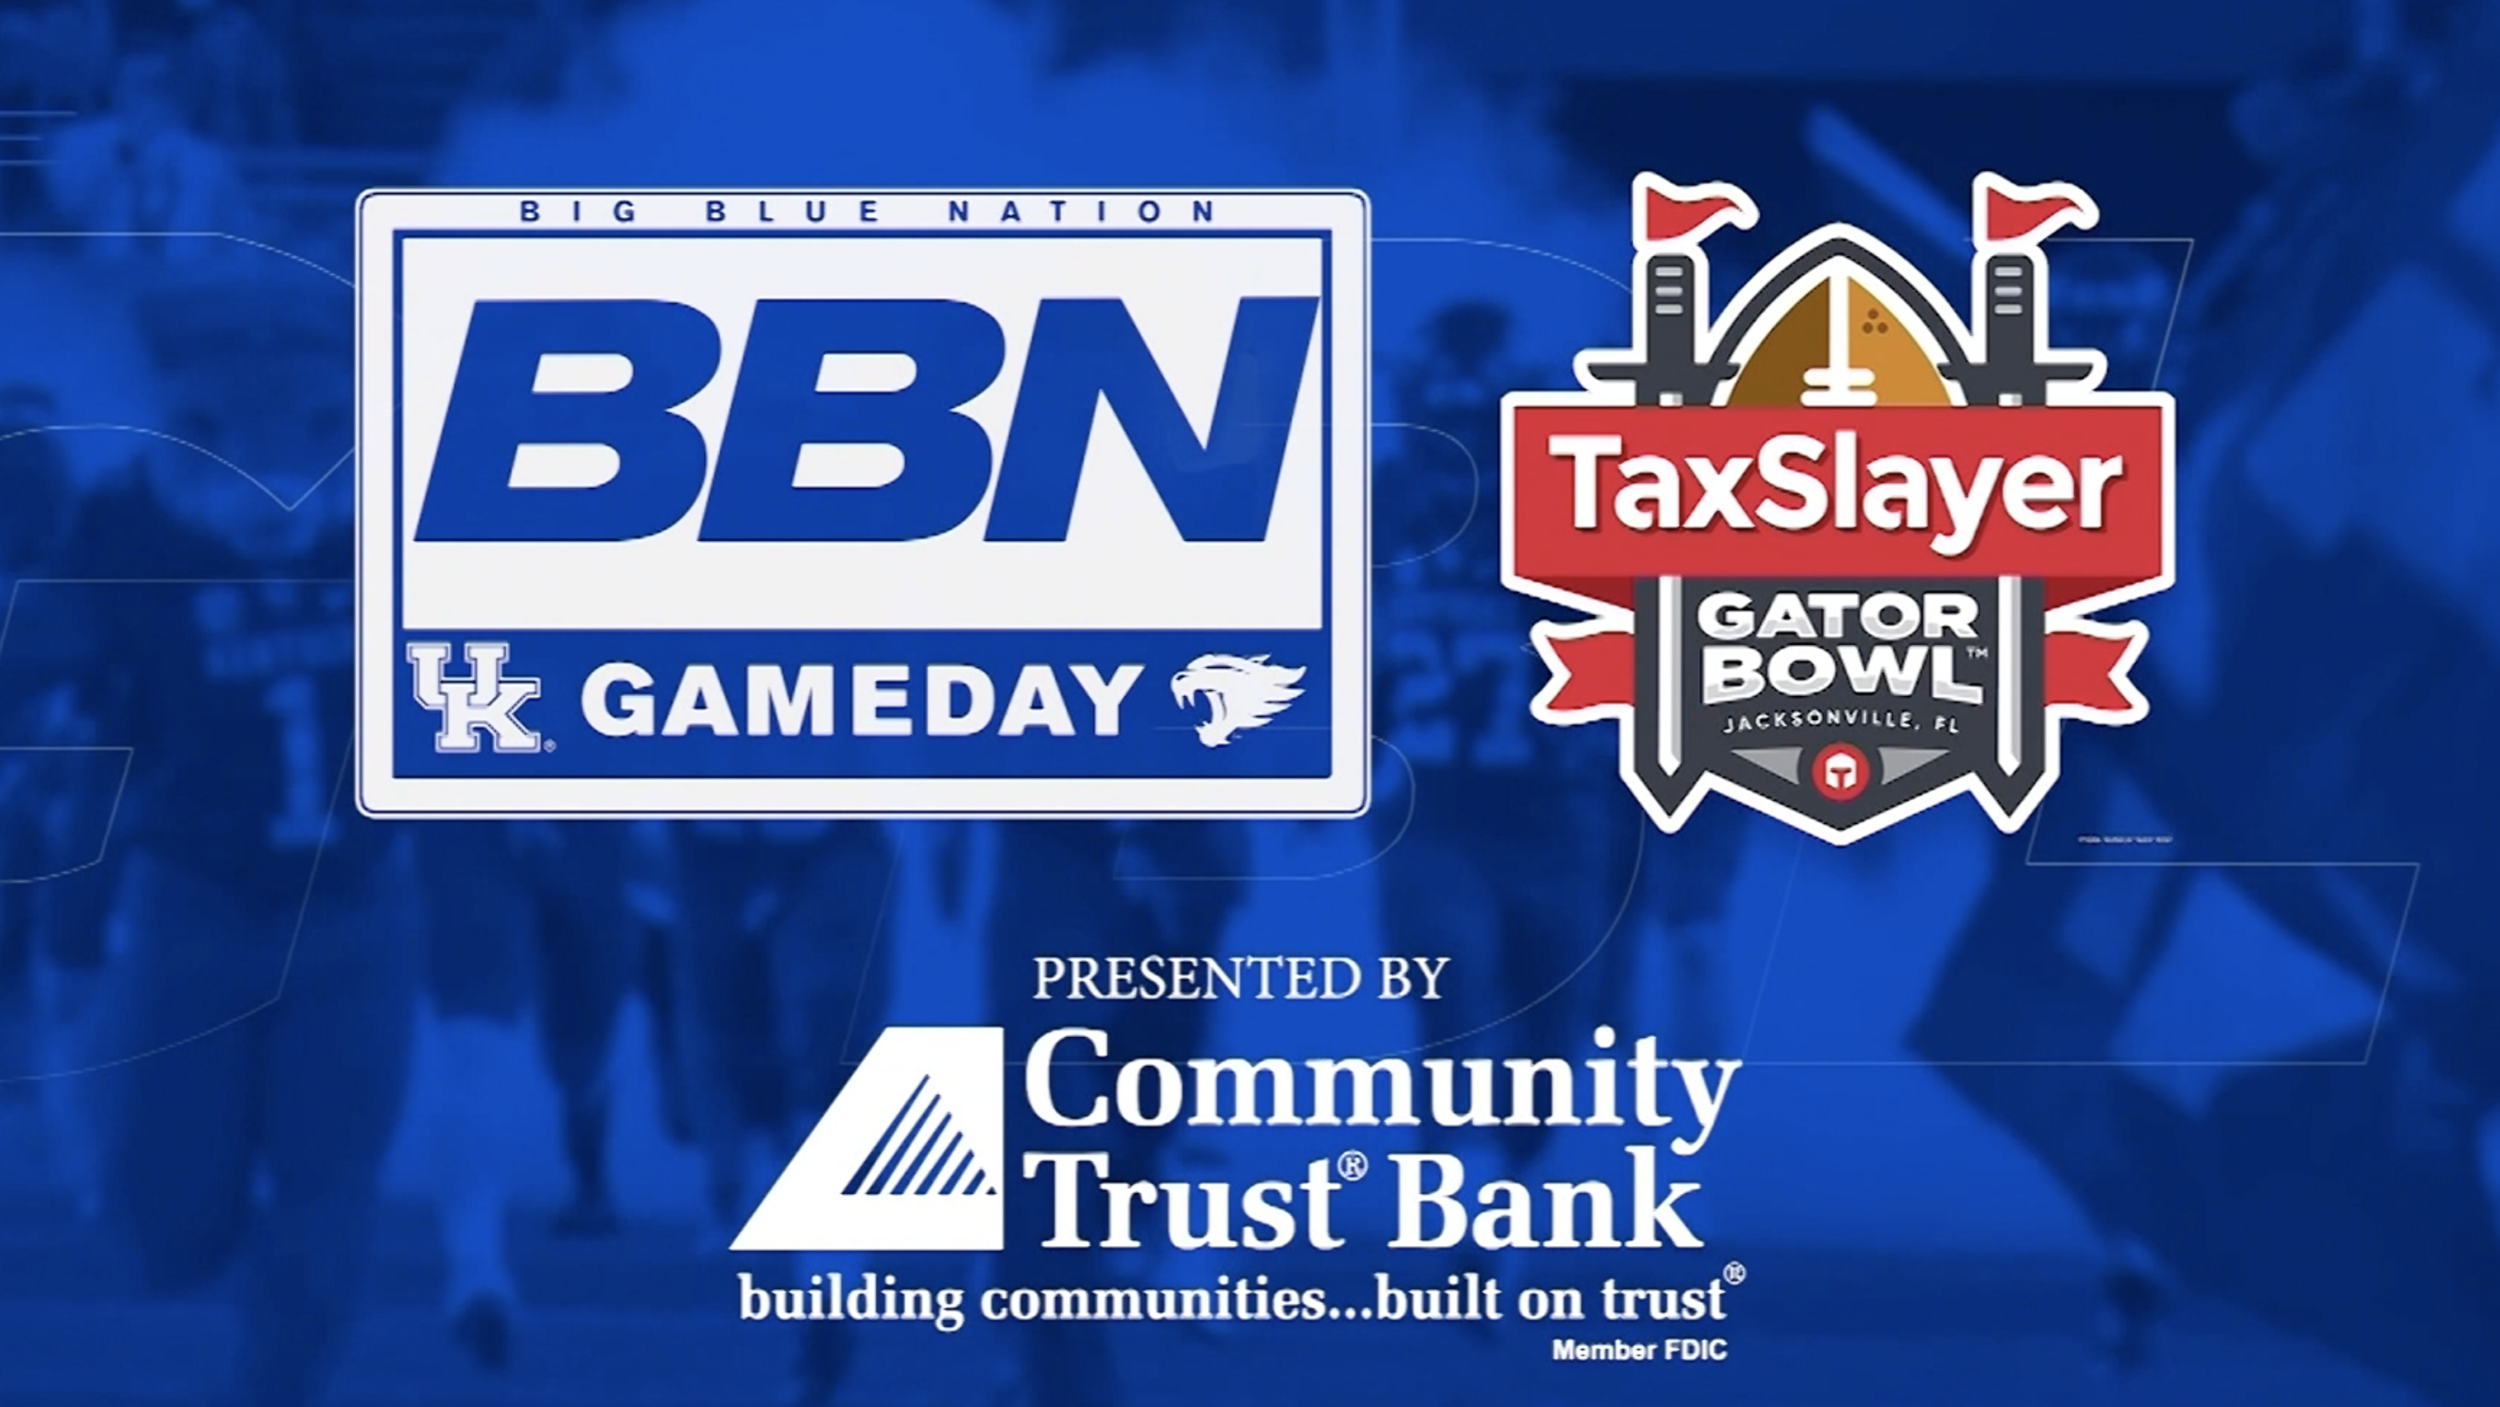 BBN Gameday, Gator Bowl preview. Presented by Community Trust Bank